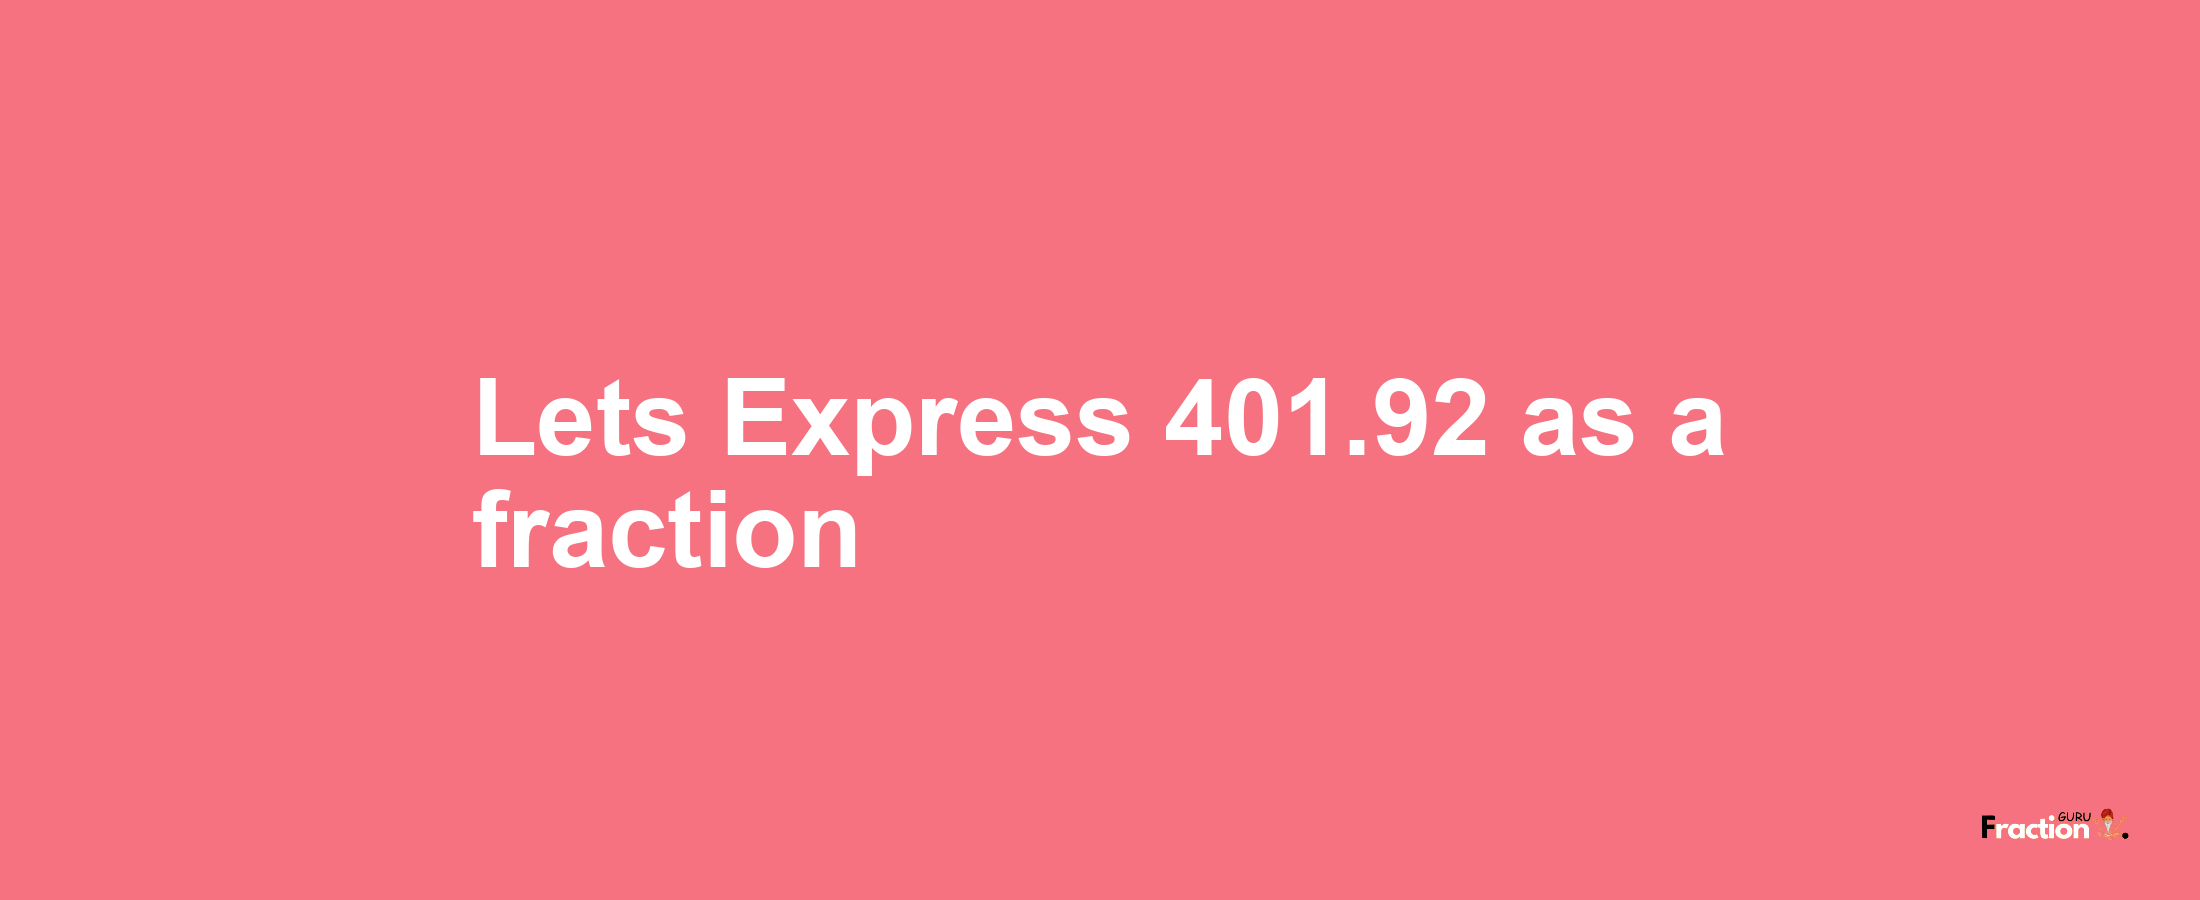 Lets Express 401.92 as afraction